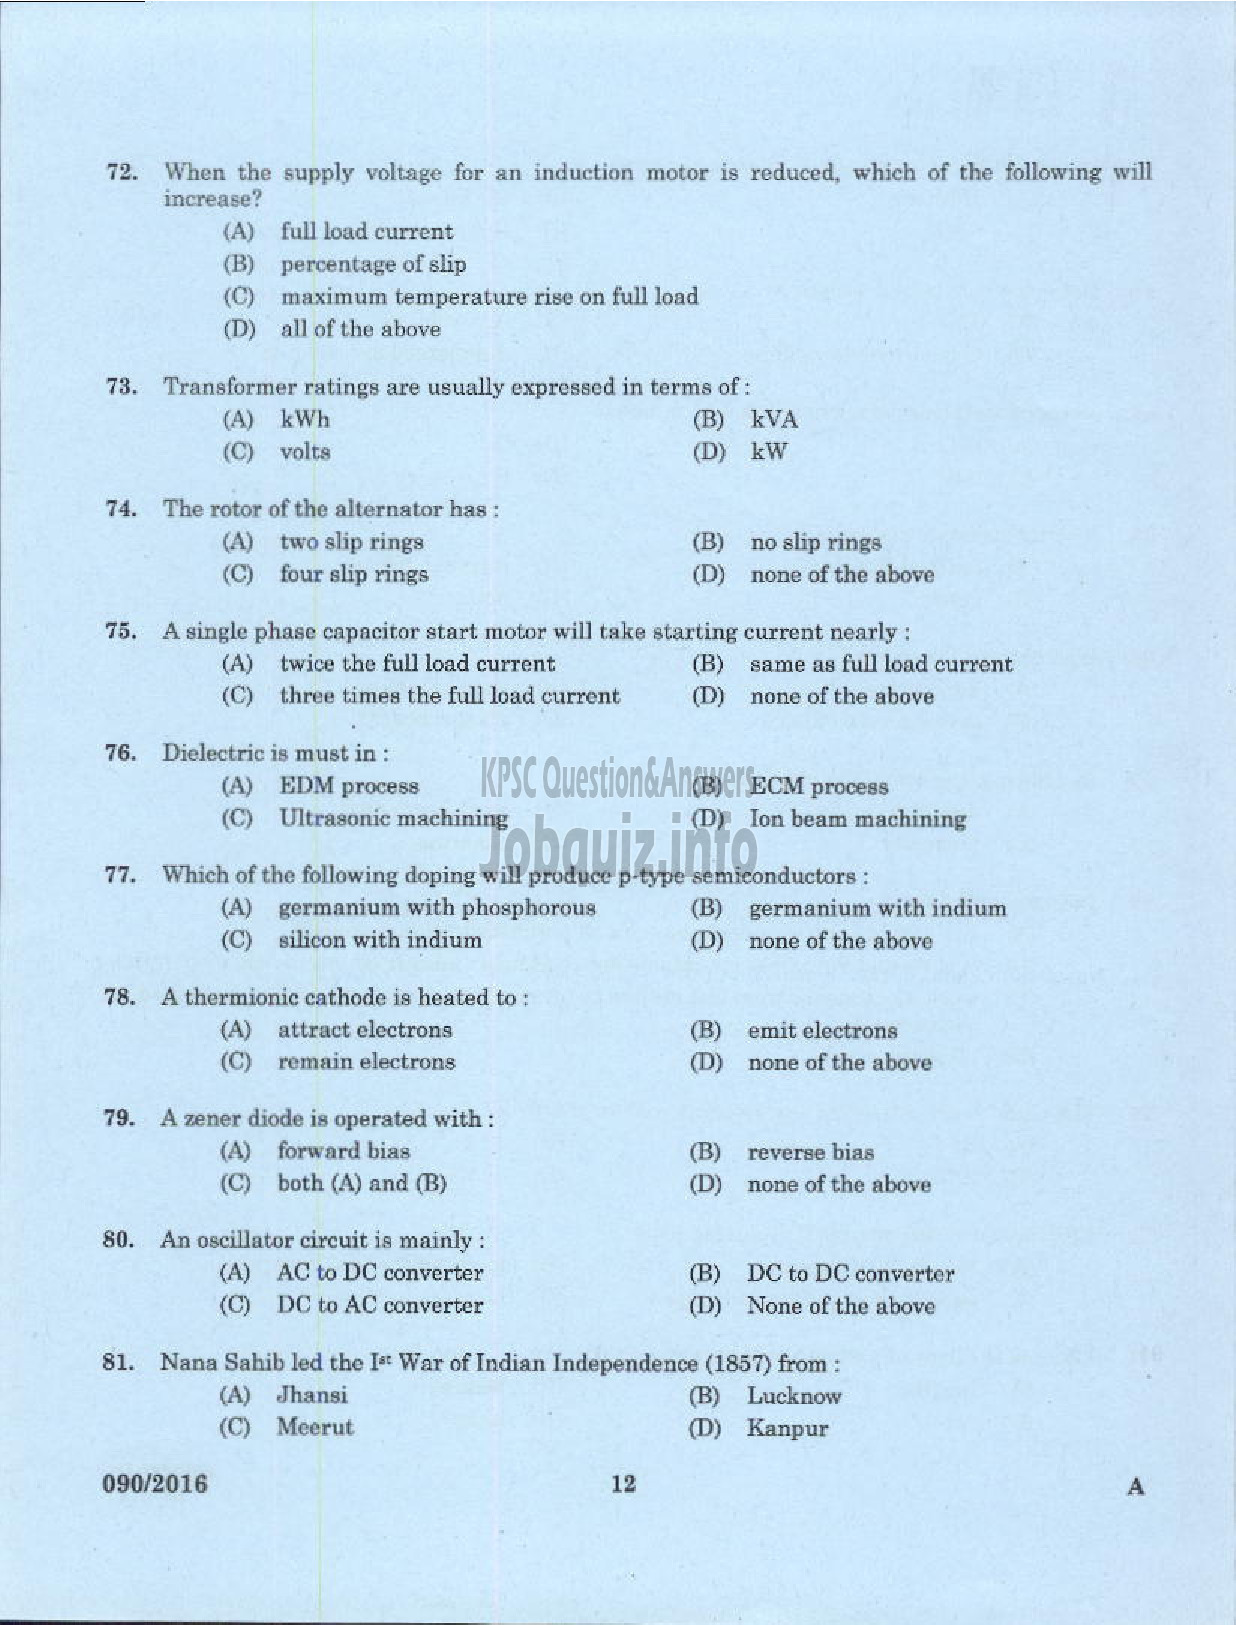 Kerala PSC Question Paper - VOCATIONAL INSTRUCTOR IN REFRIGERATION AND AIR CONDITIONING VHSE-10